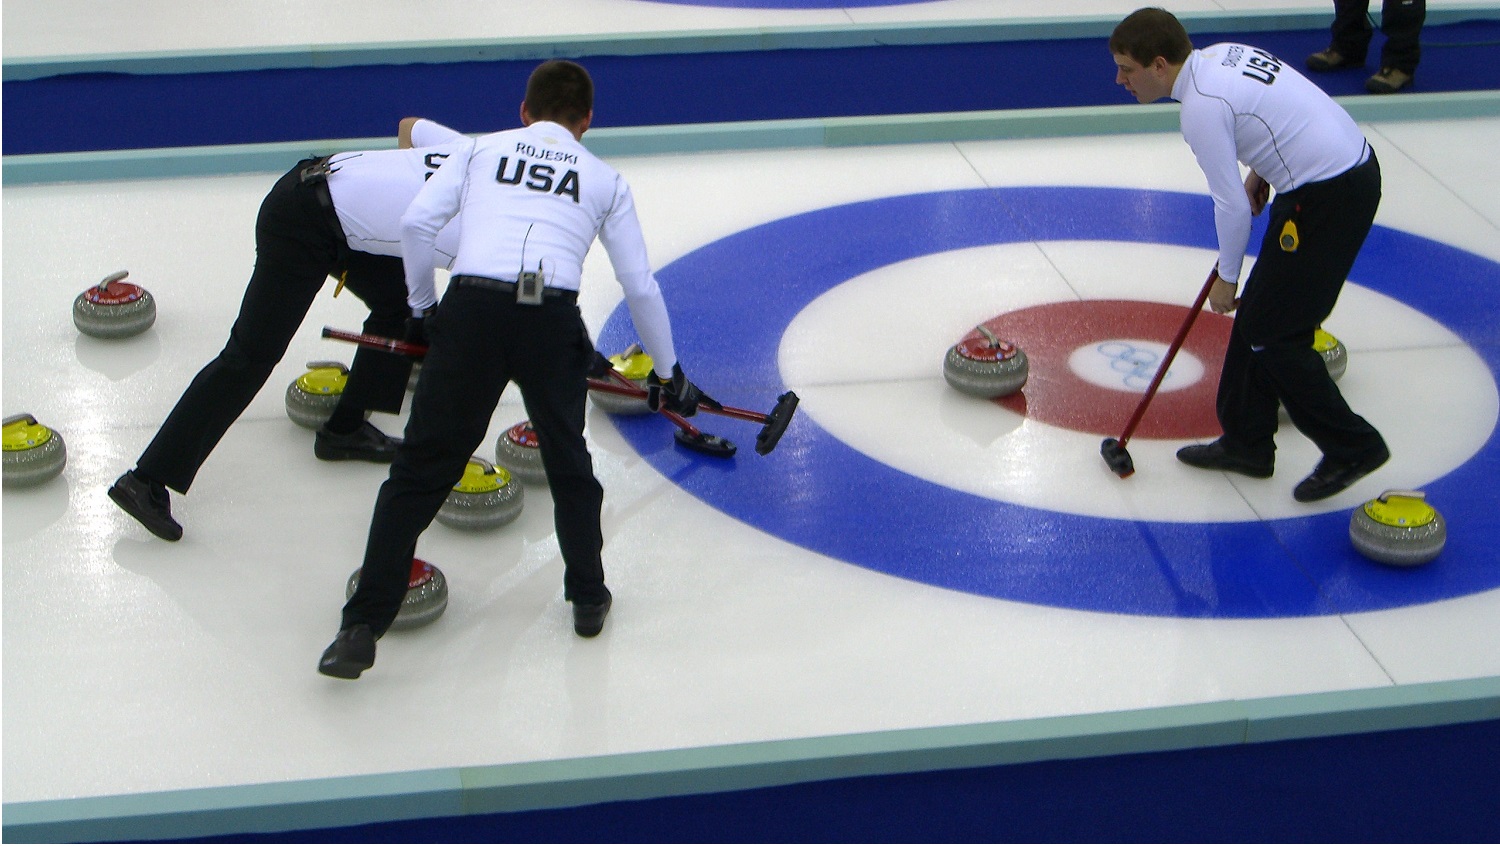 Curling USA Team Members on the Ice